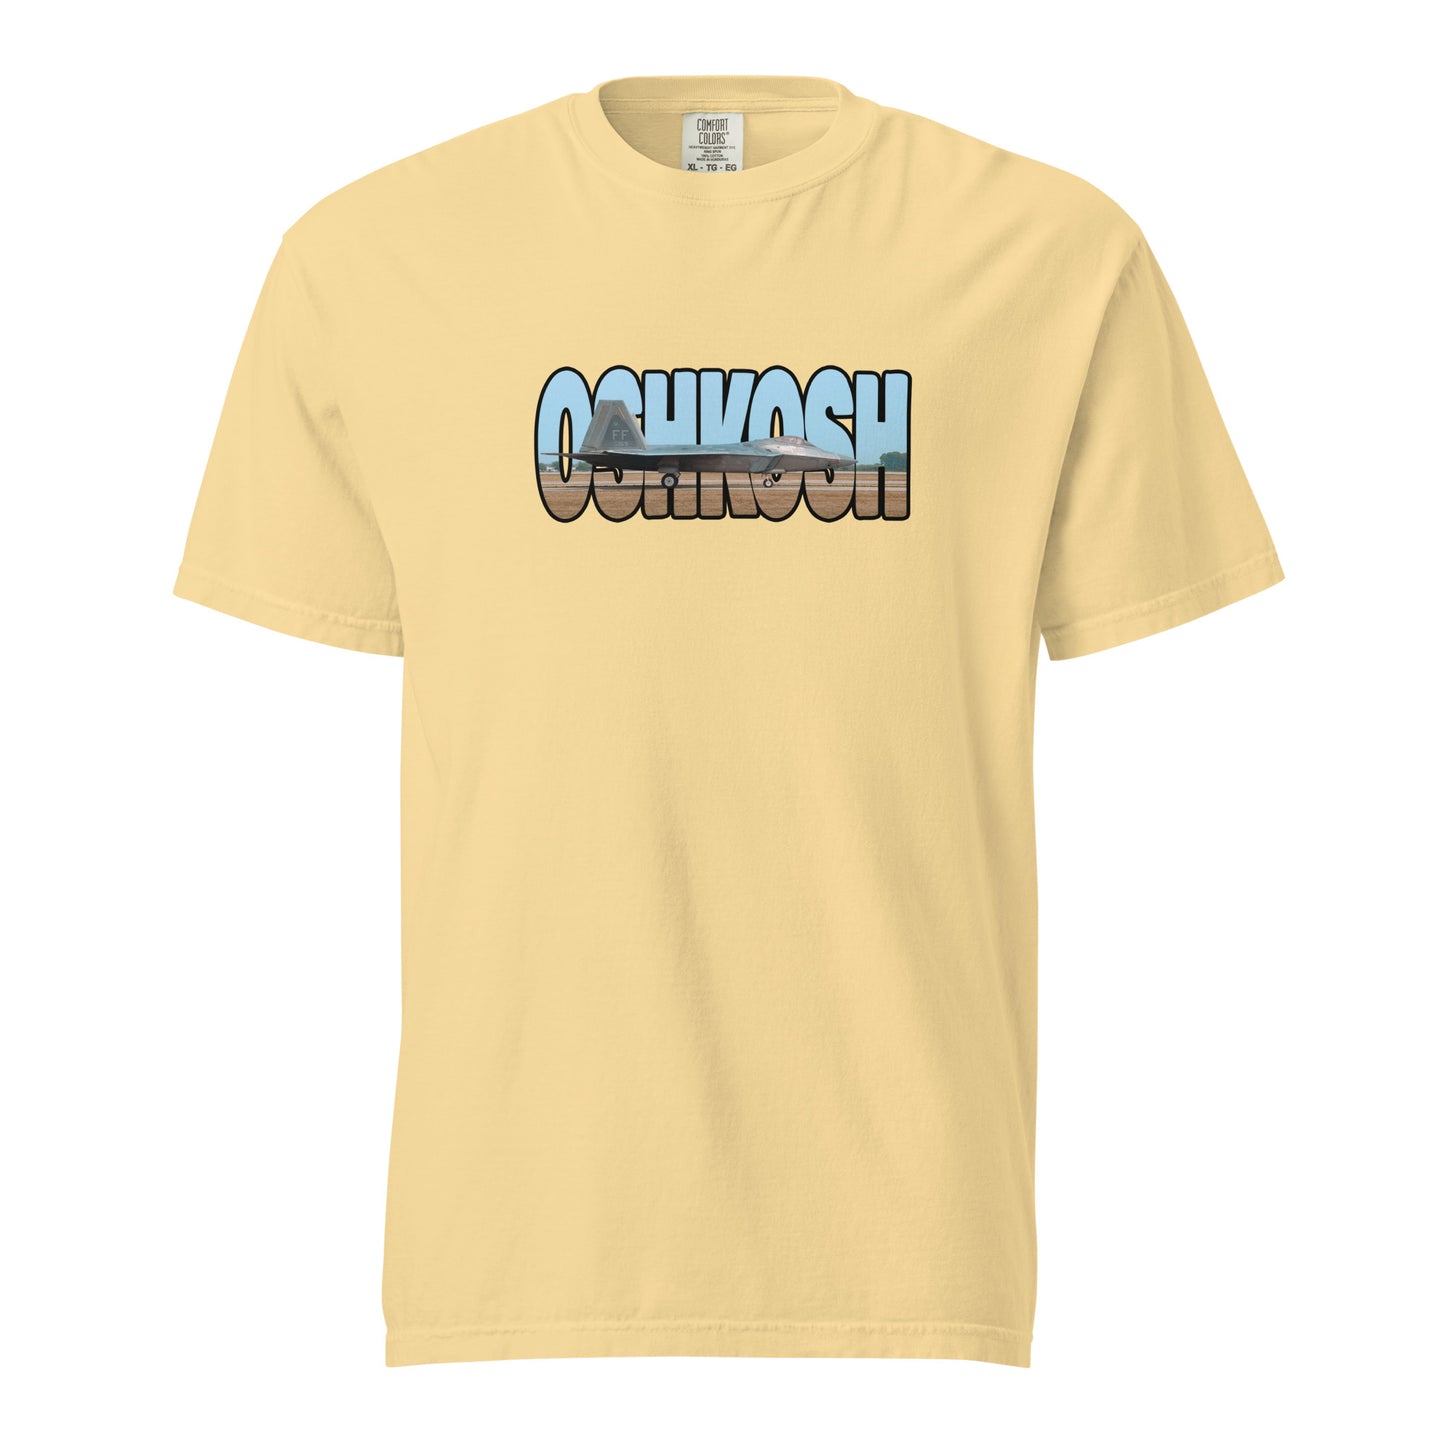 This shirt features an image of an F-22 taxiing at Wittman Regional Airport contained inside of the word "Oshkosh"